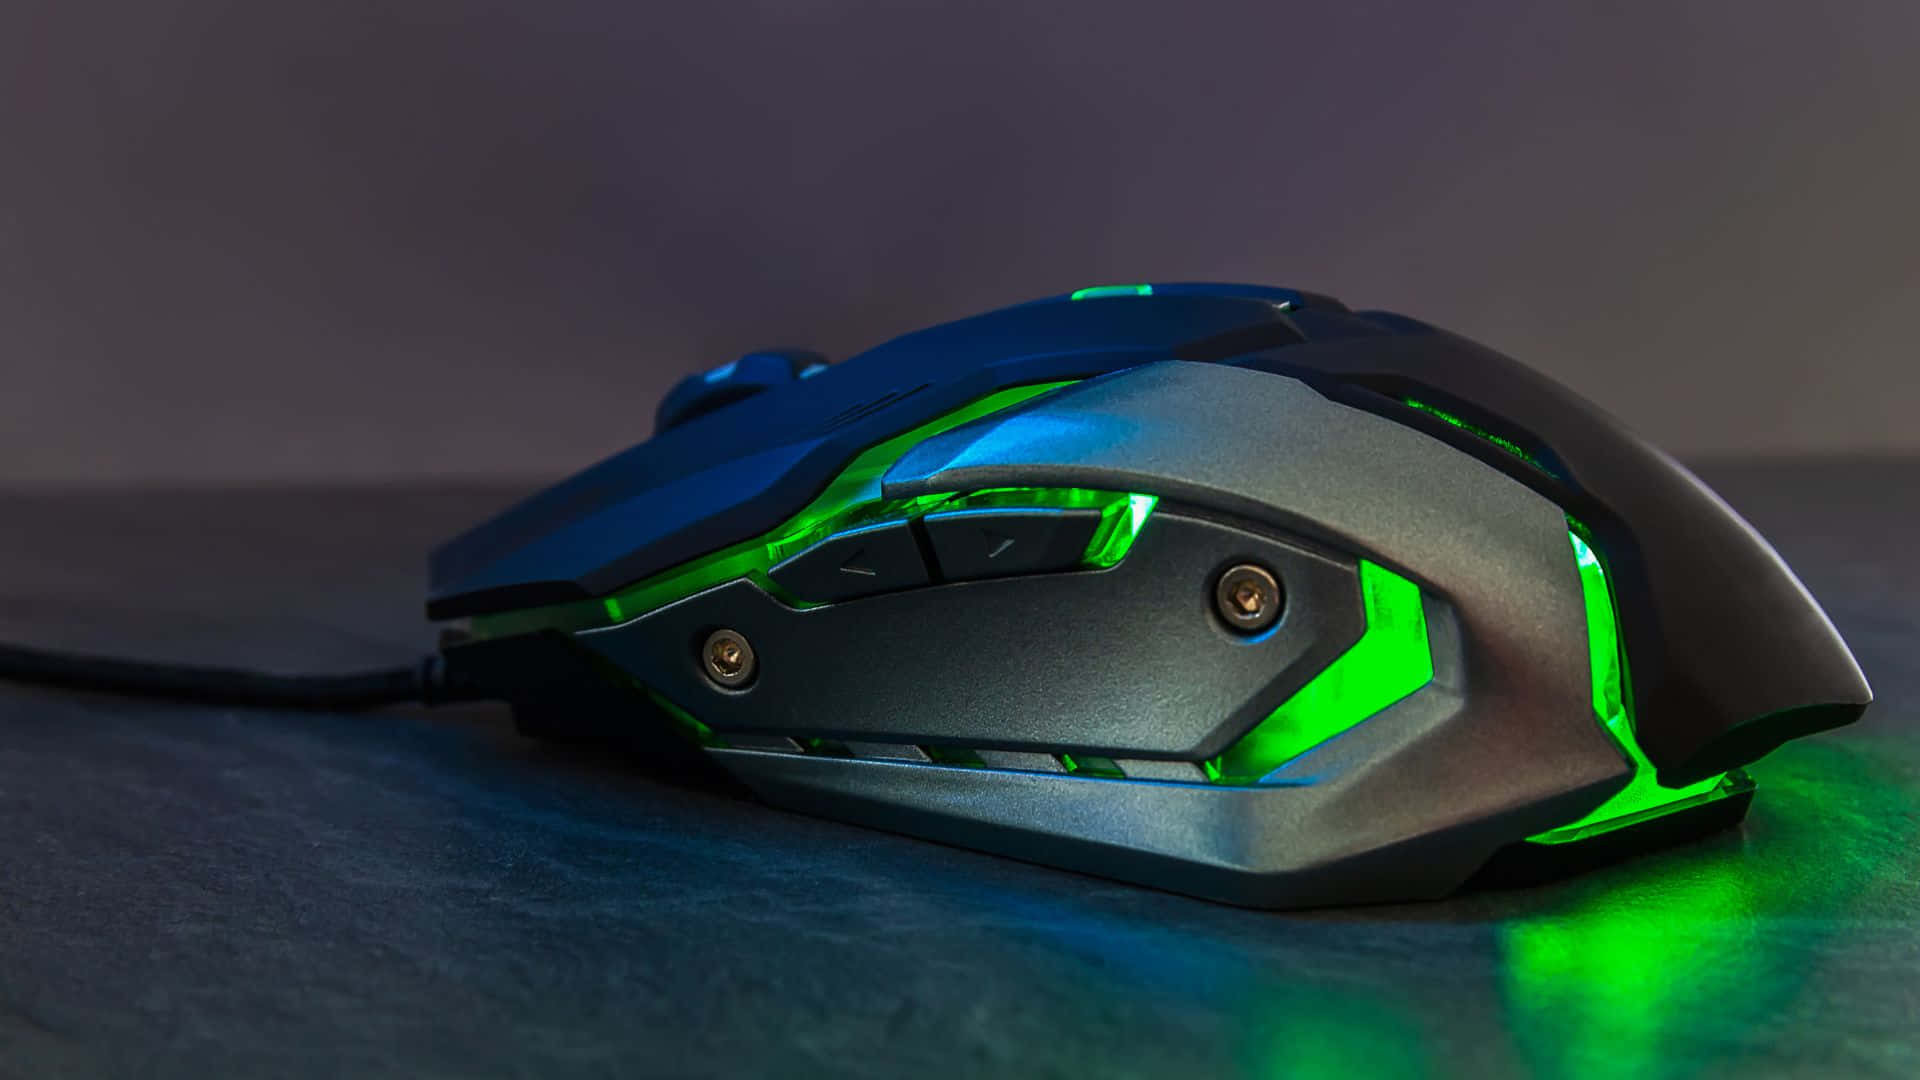 Get the edge you need with state-of-the-art gaming mice. Wallpaper